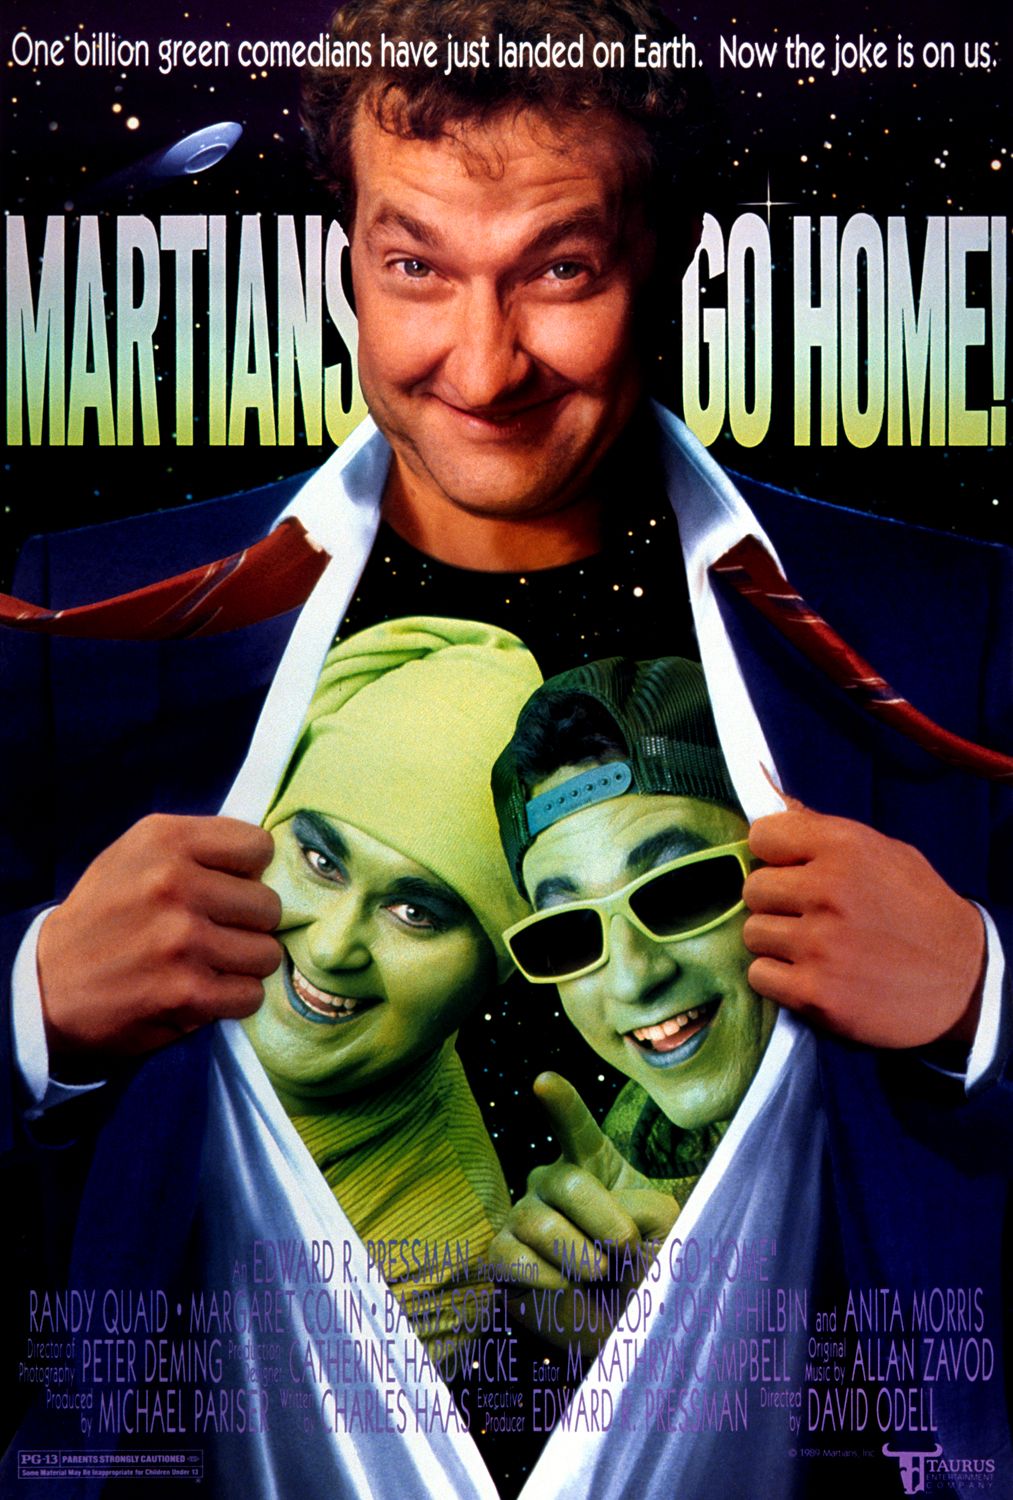 Extra Large Movie Poster Image for Martians Go Home (#2 of 2)